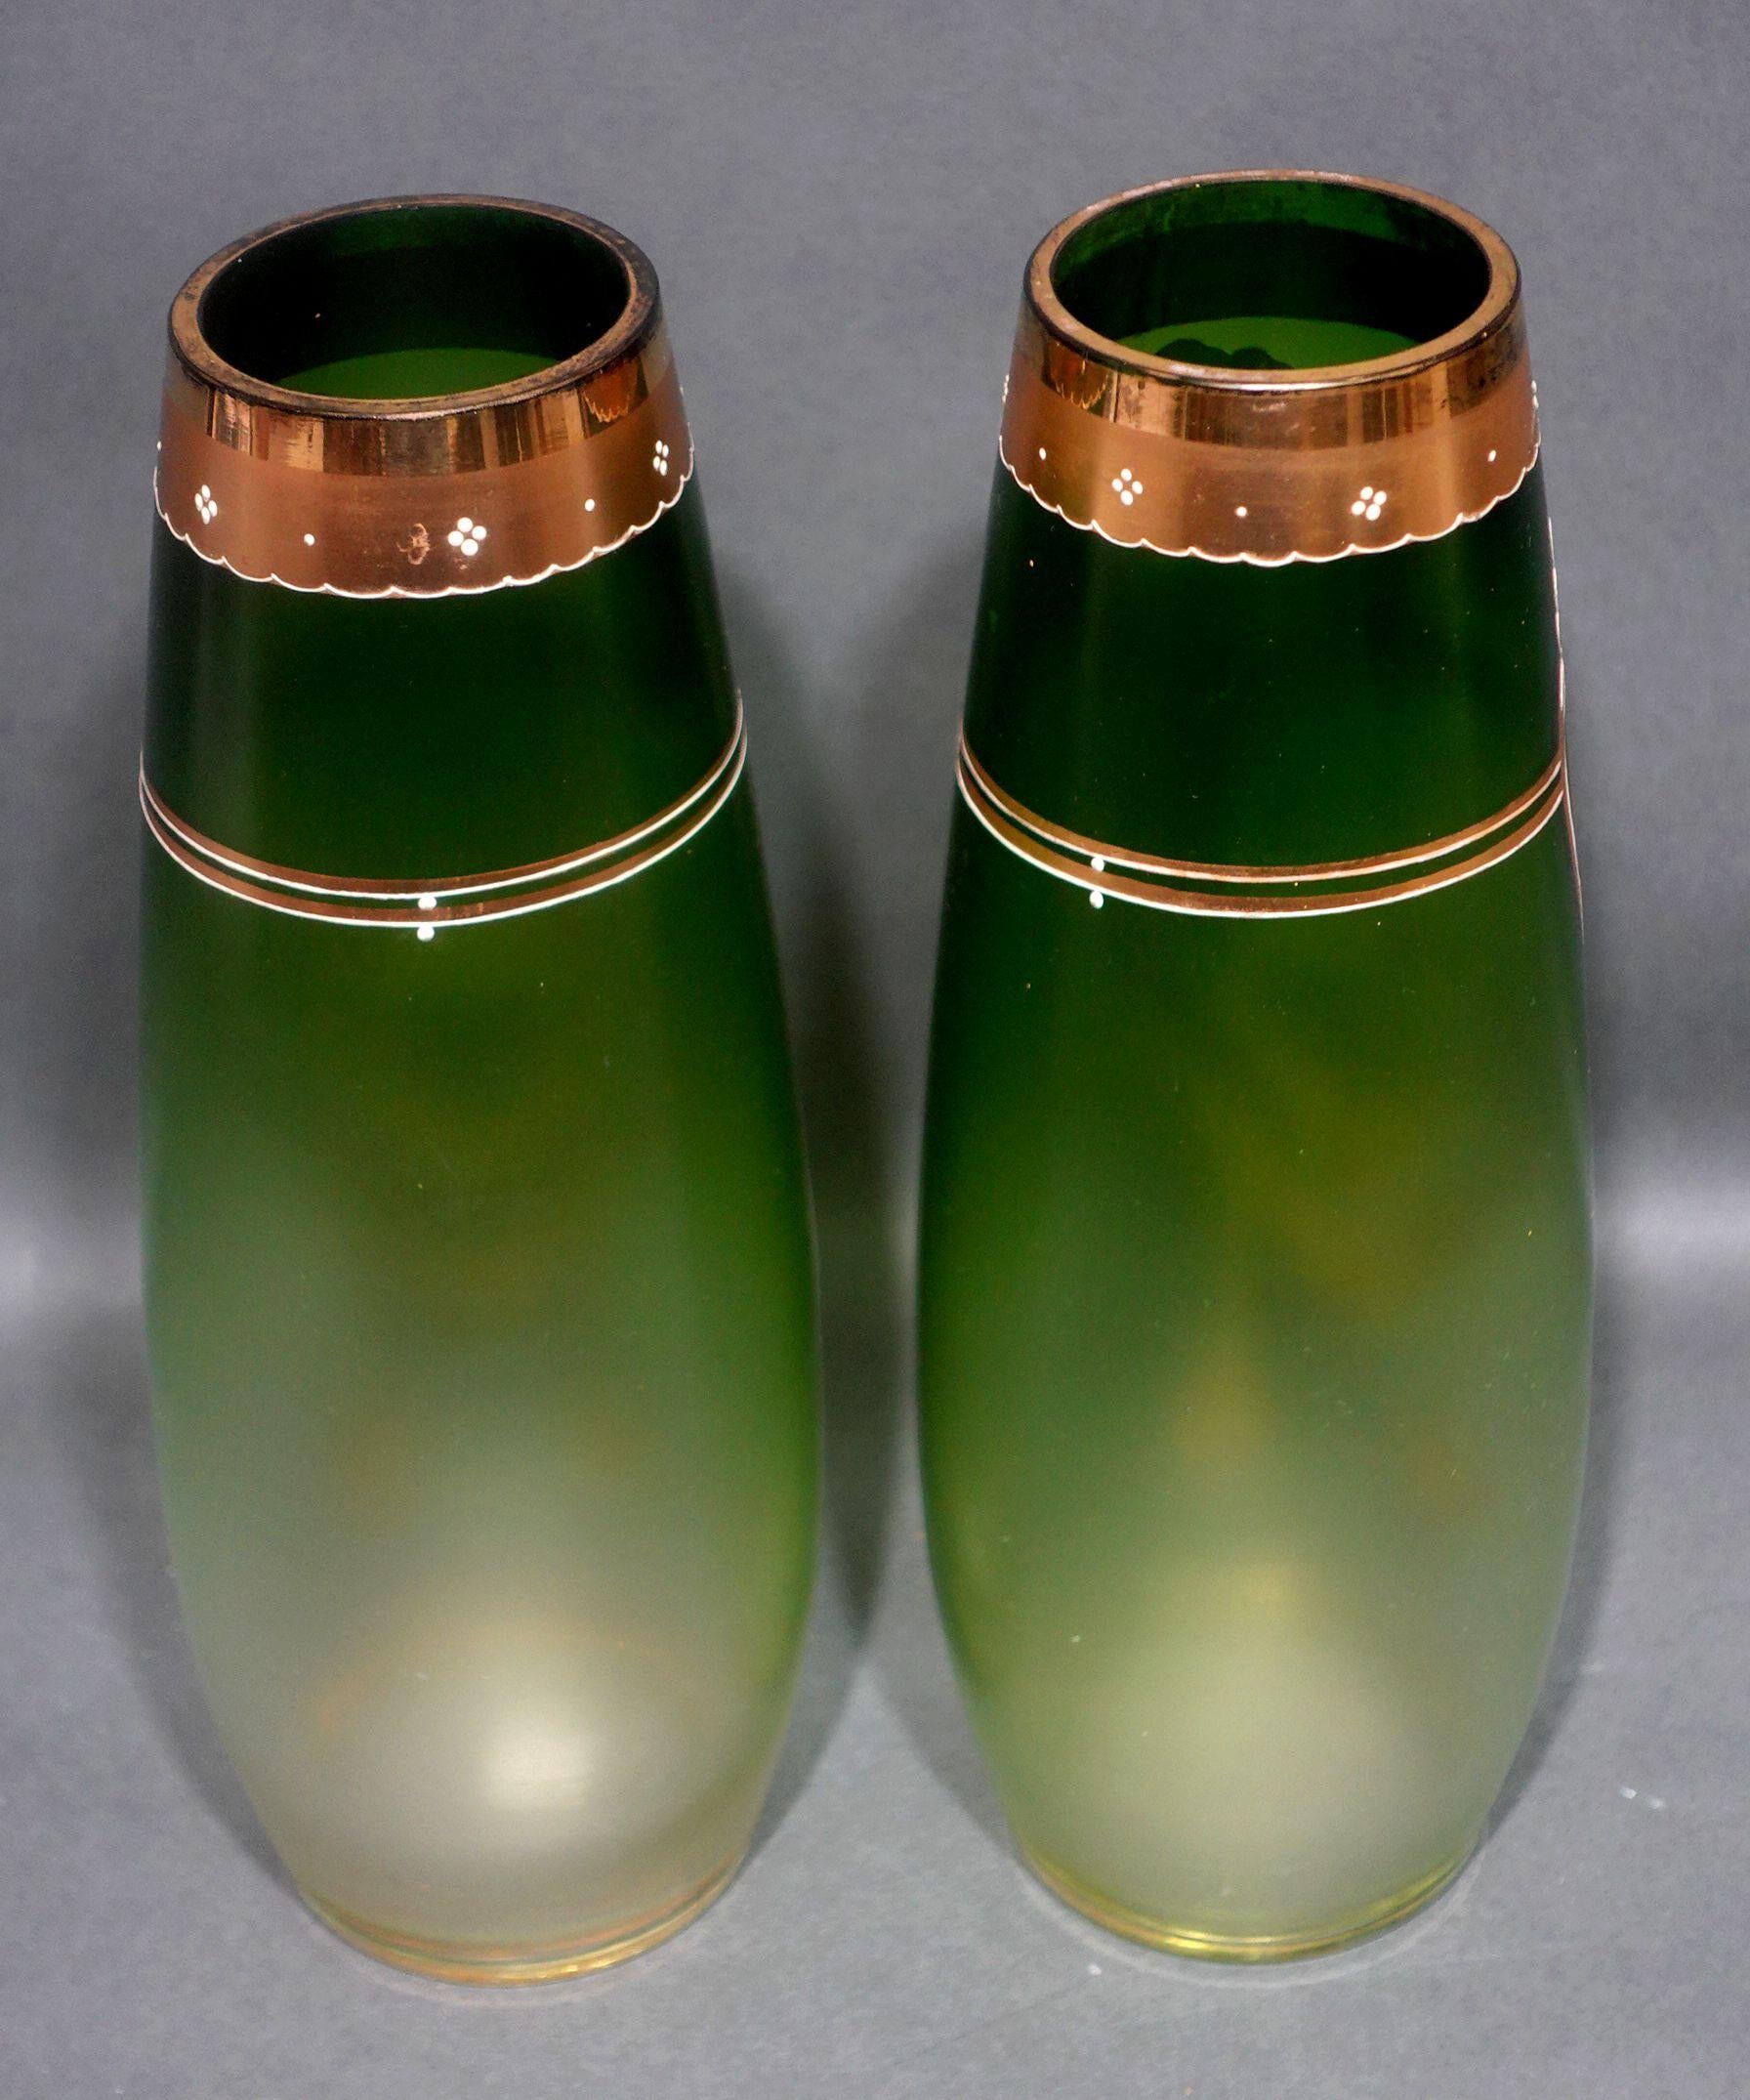 Art Nouveau Enameled and Gilt Art Glass Vases In Good Condition For Sale In Norton, MA